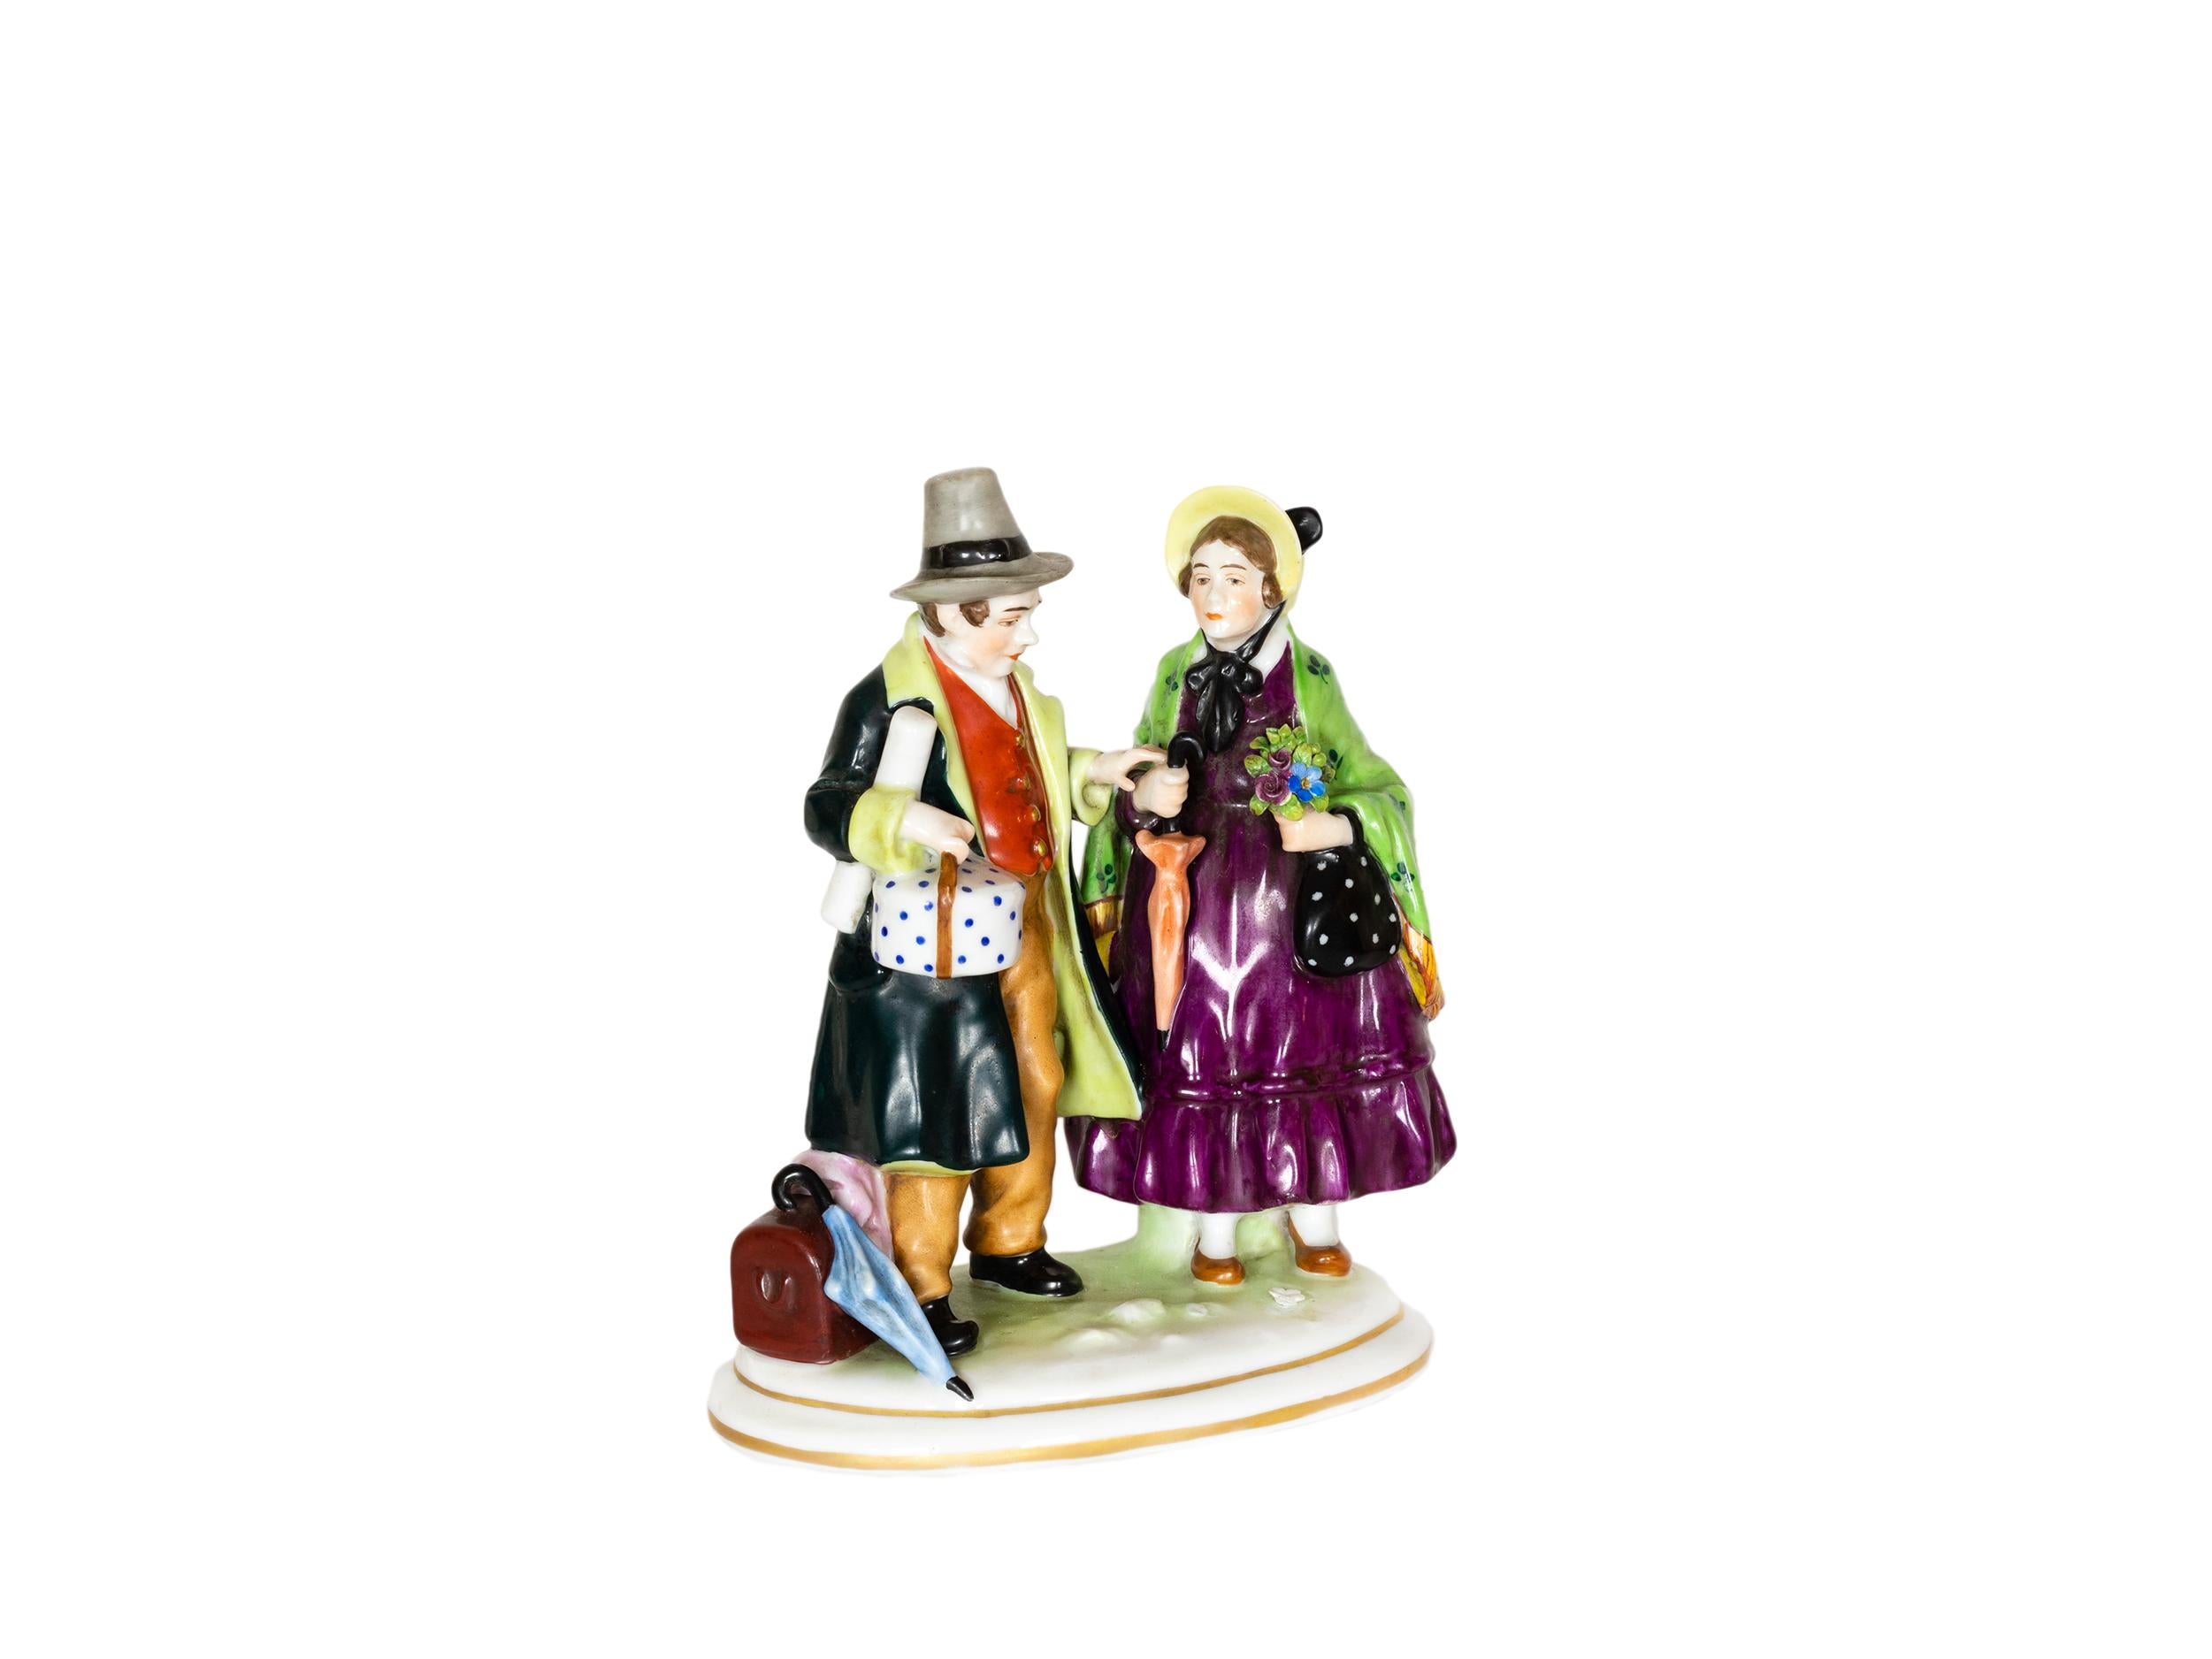 A charming translucent soft-paste porcelain figurine of a traveling couple with suitcases, a delicate piece in excellent condition. 
The woman wearing a clover etched jacket.
Capodimonte Italian Porcelain mark (1771 to 1834) on the bottom.